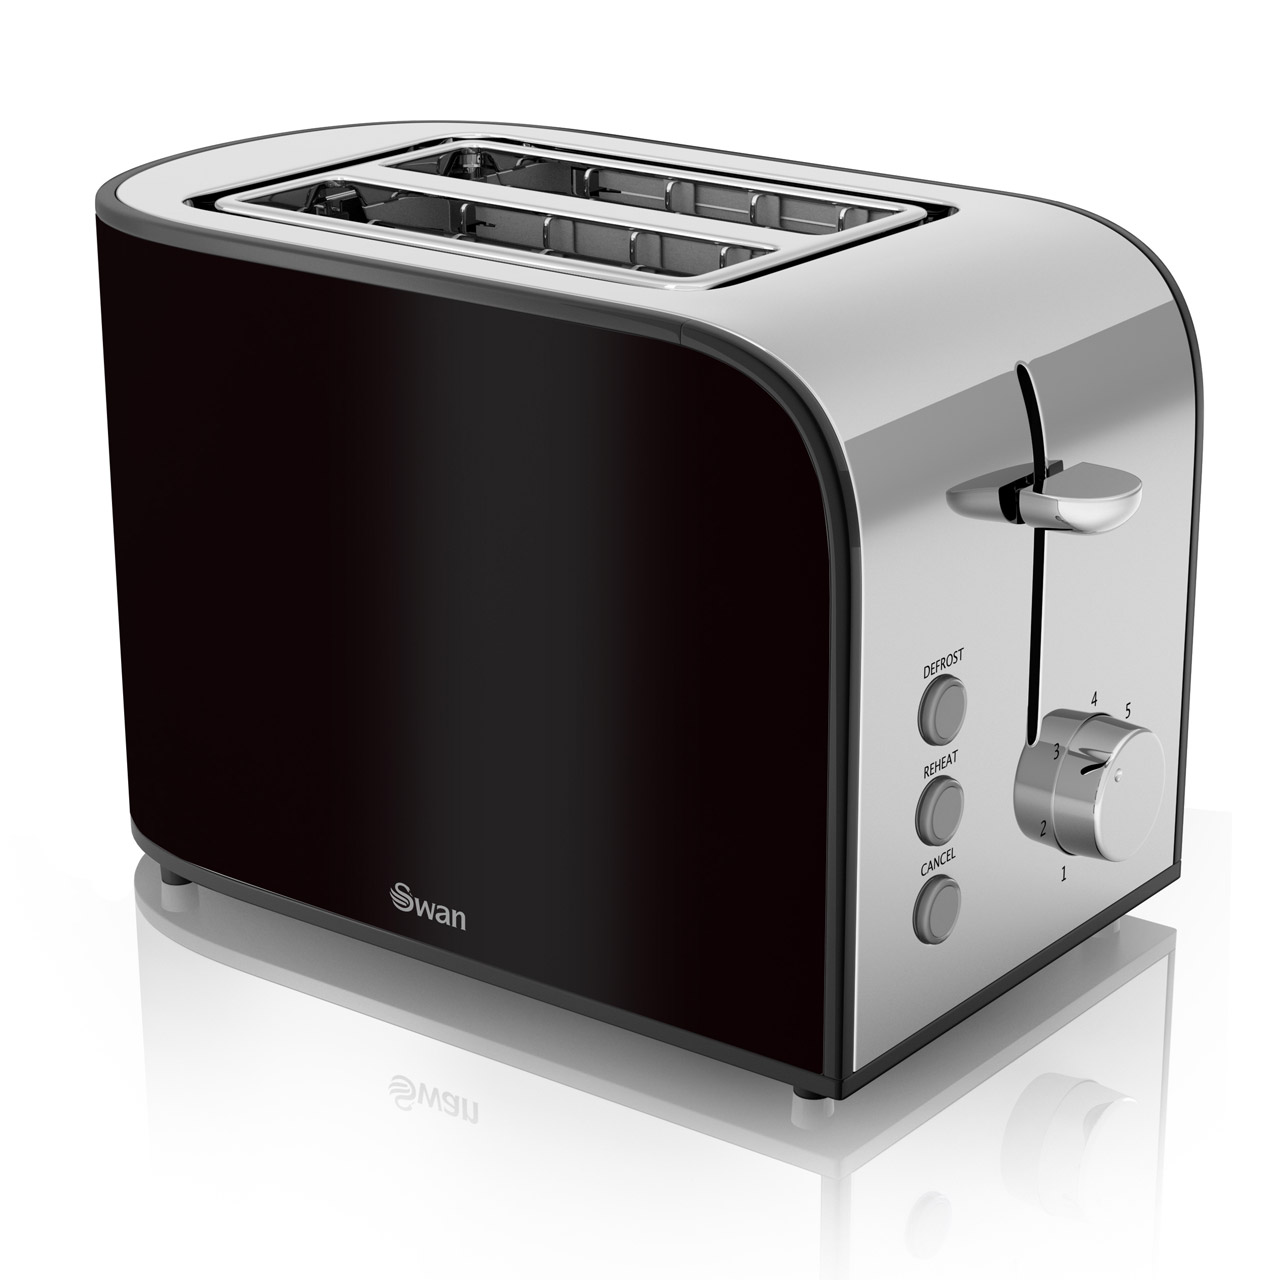 Image of Swan ST17020BLKN 2 Slice Townhouse Toaster in Black Chrome